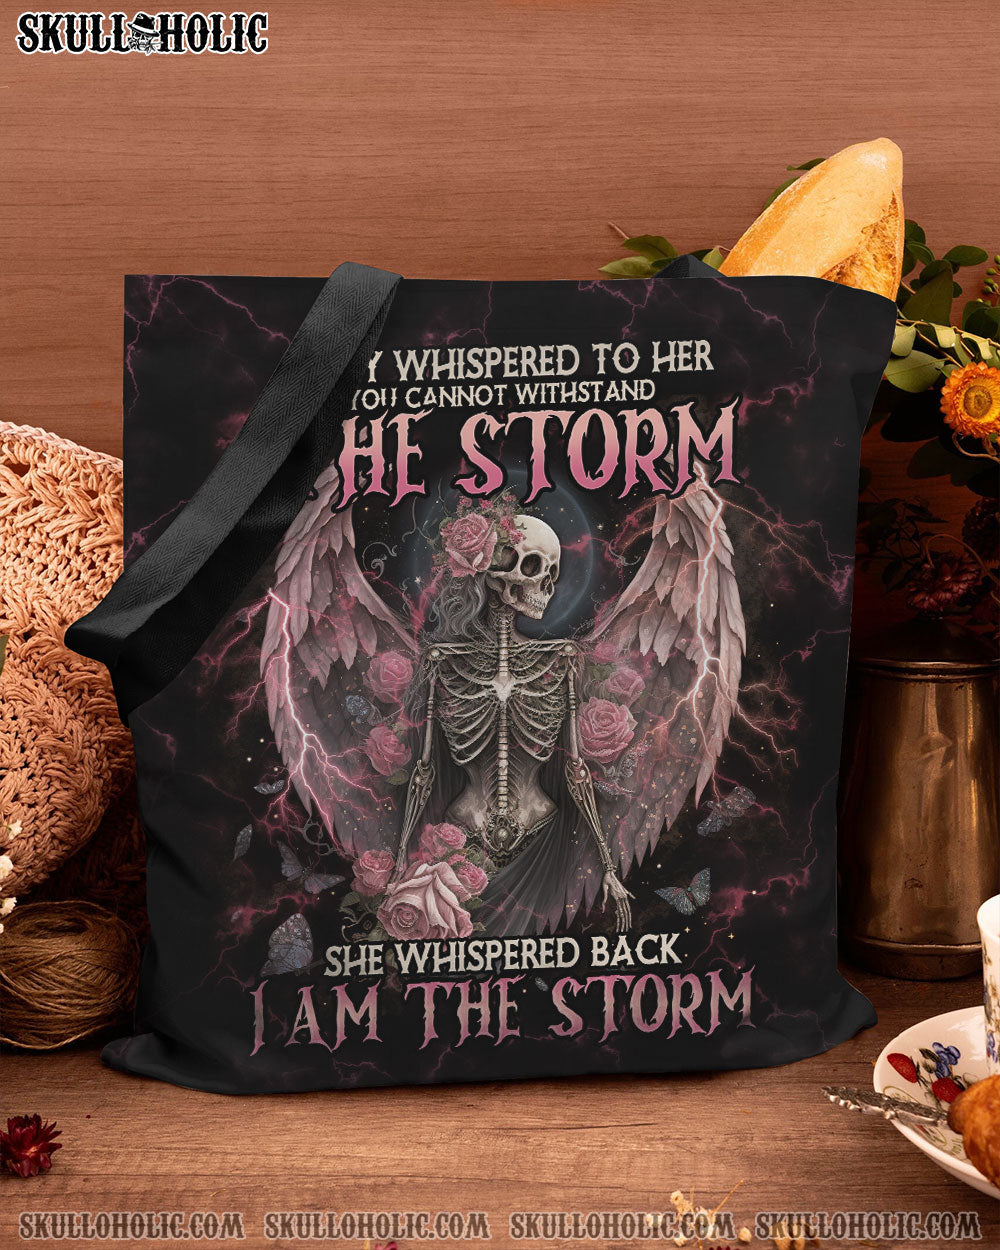 I AM THE STORM SKELETON ROSES WINGS TOTE BAG - TLNO0602235